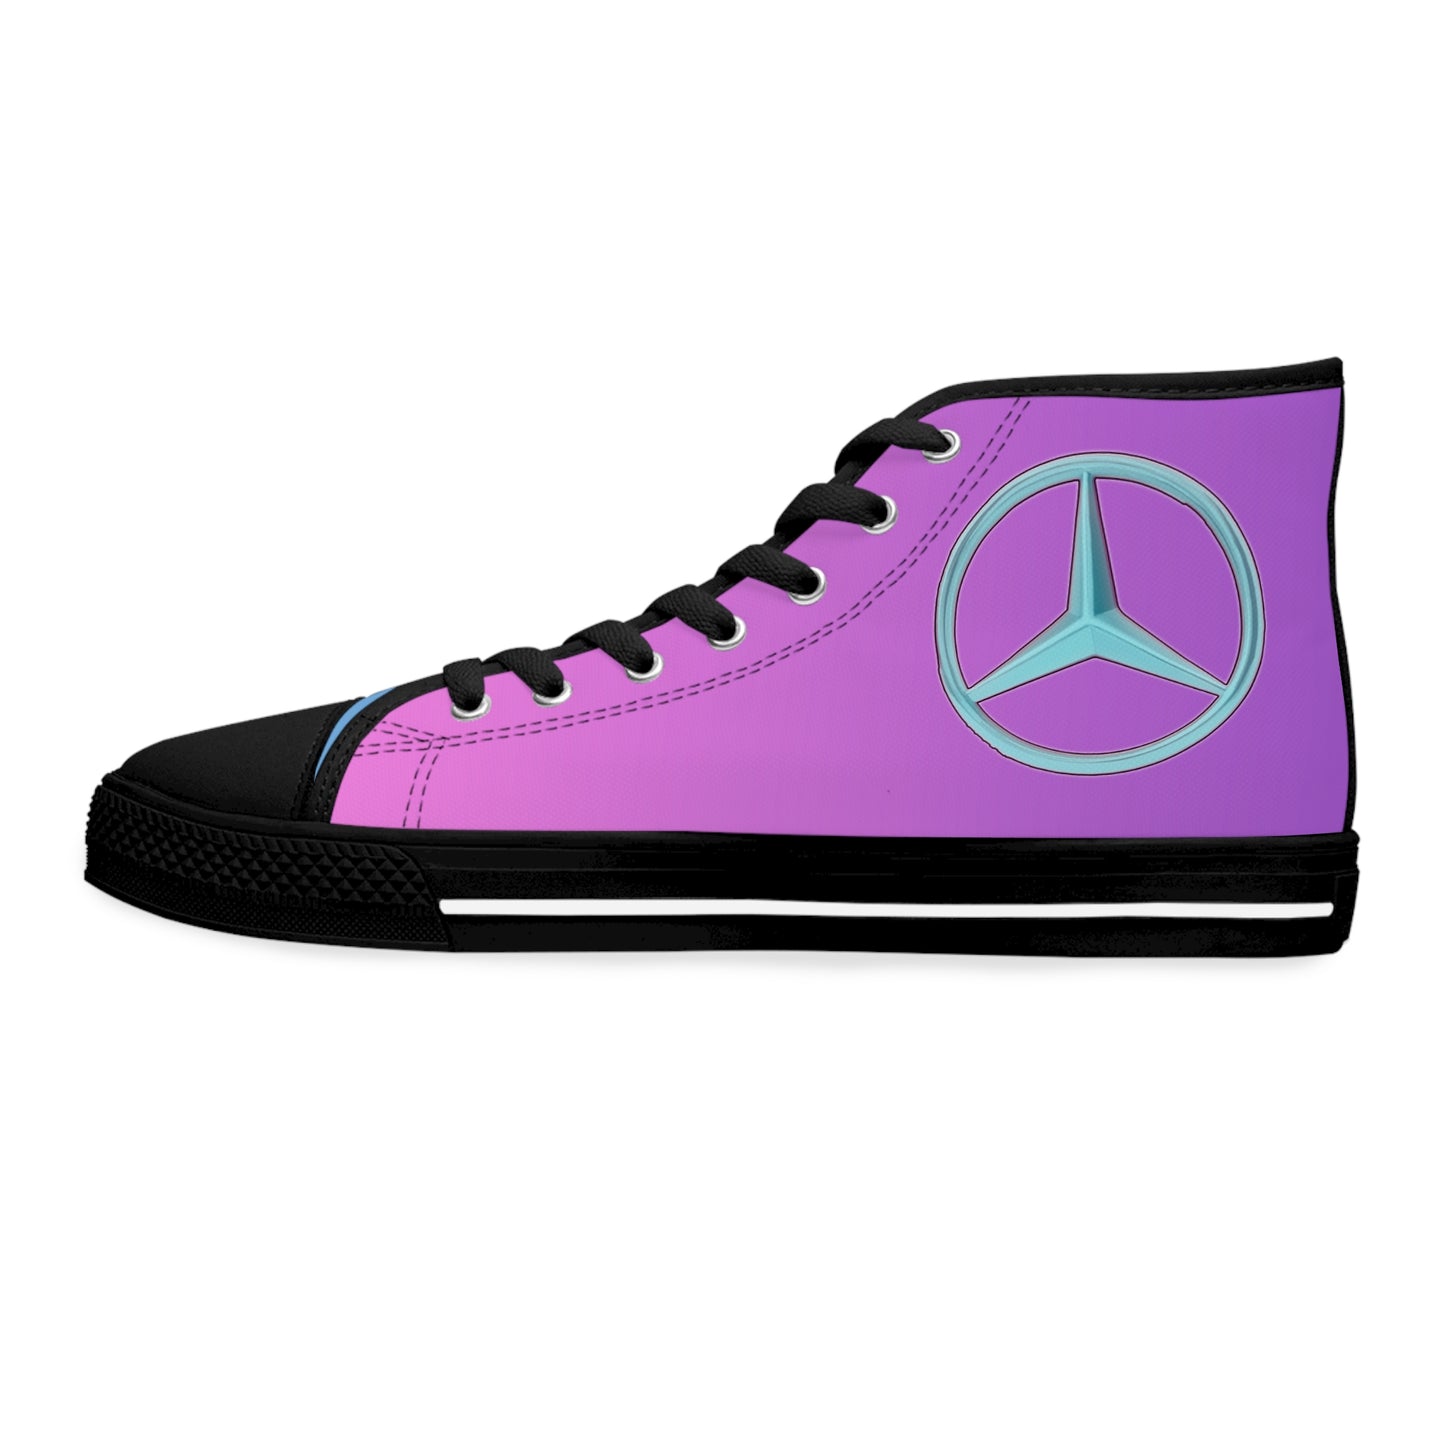 Lady Benz in Pink High Top